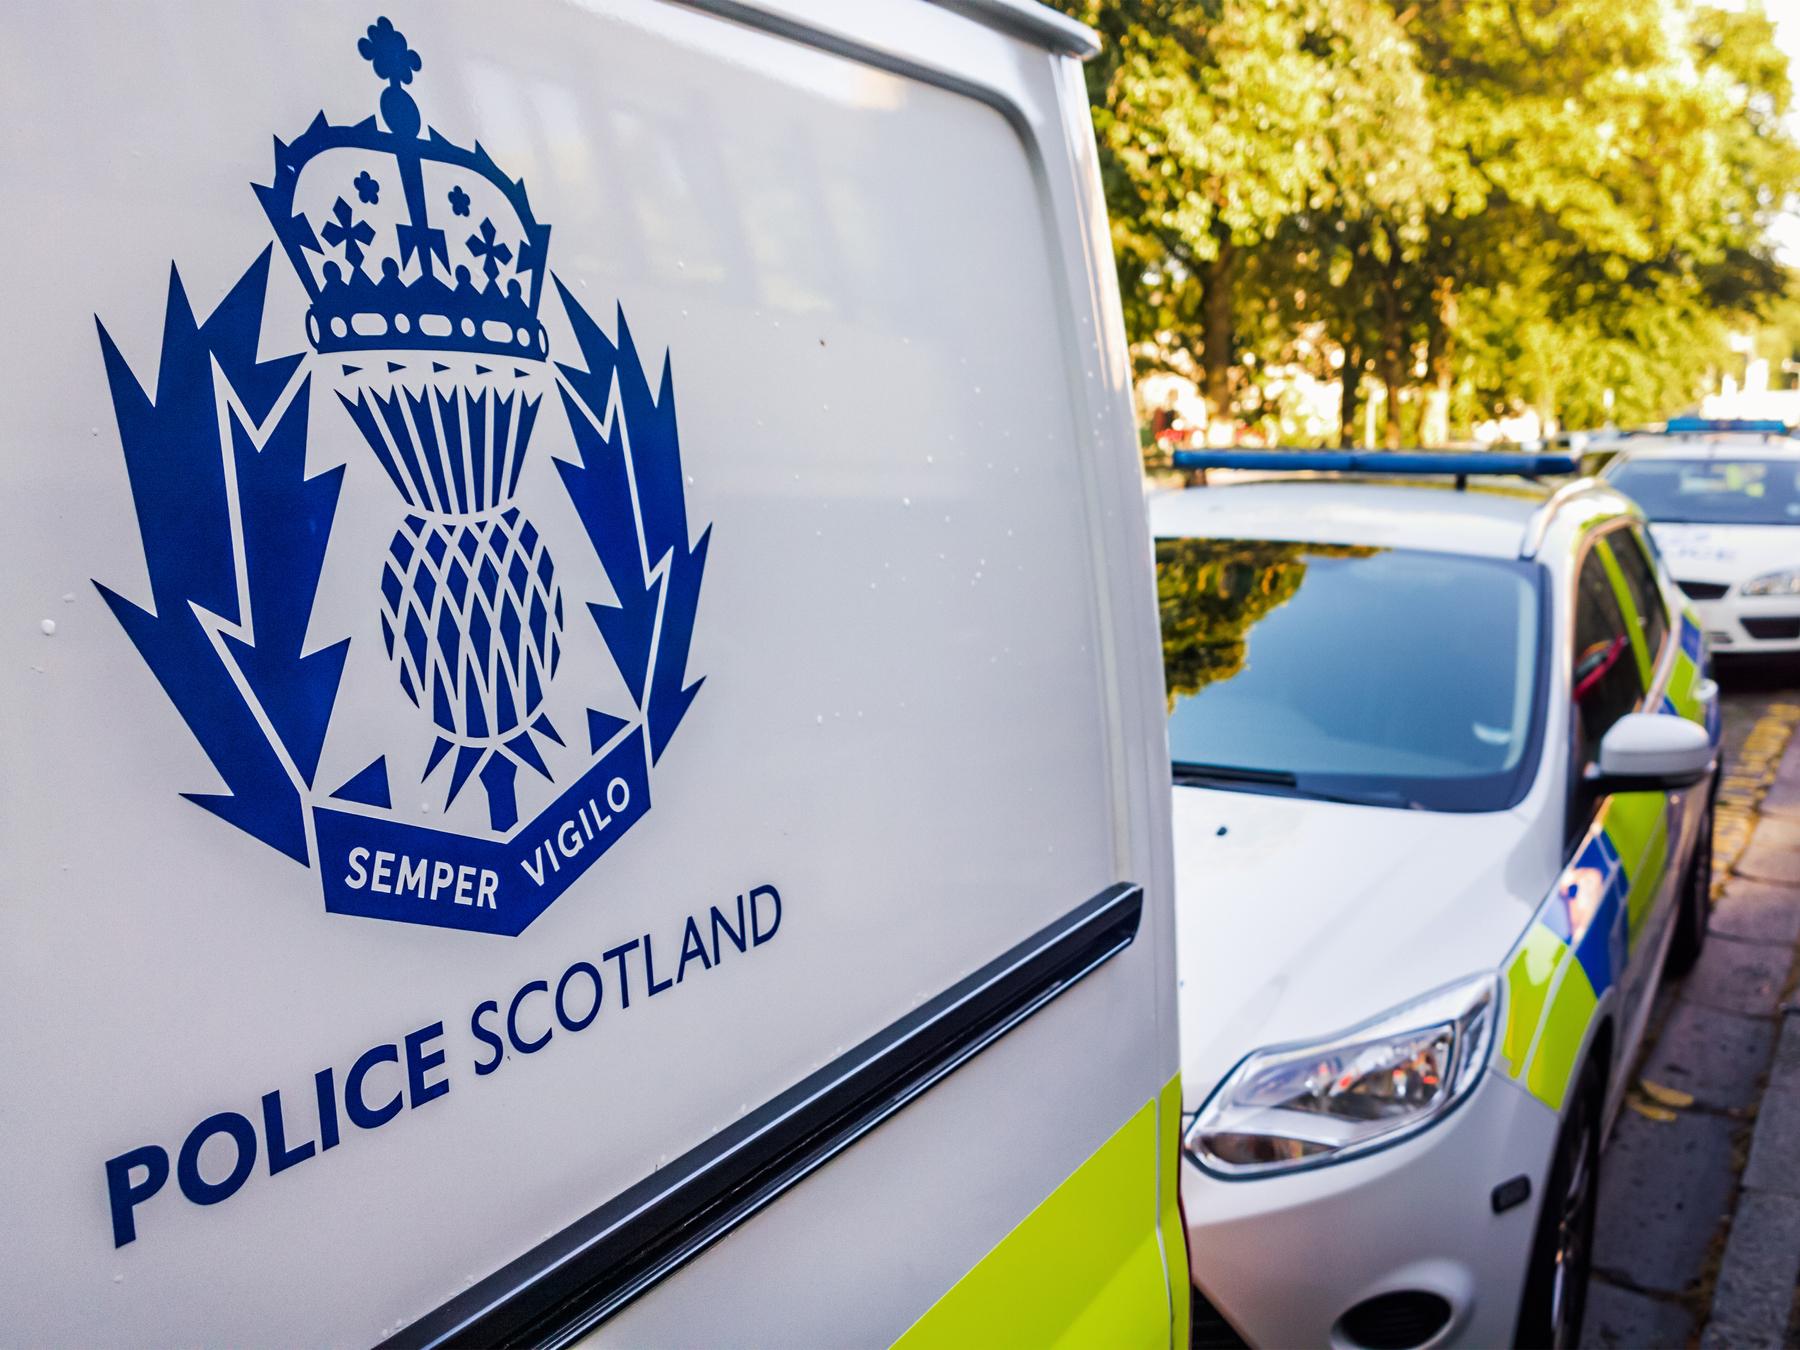 The Health and Safety Executive has been informed of the incident, Police Scotland confirmed